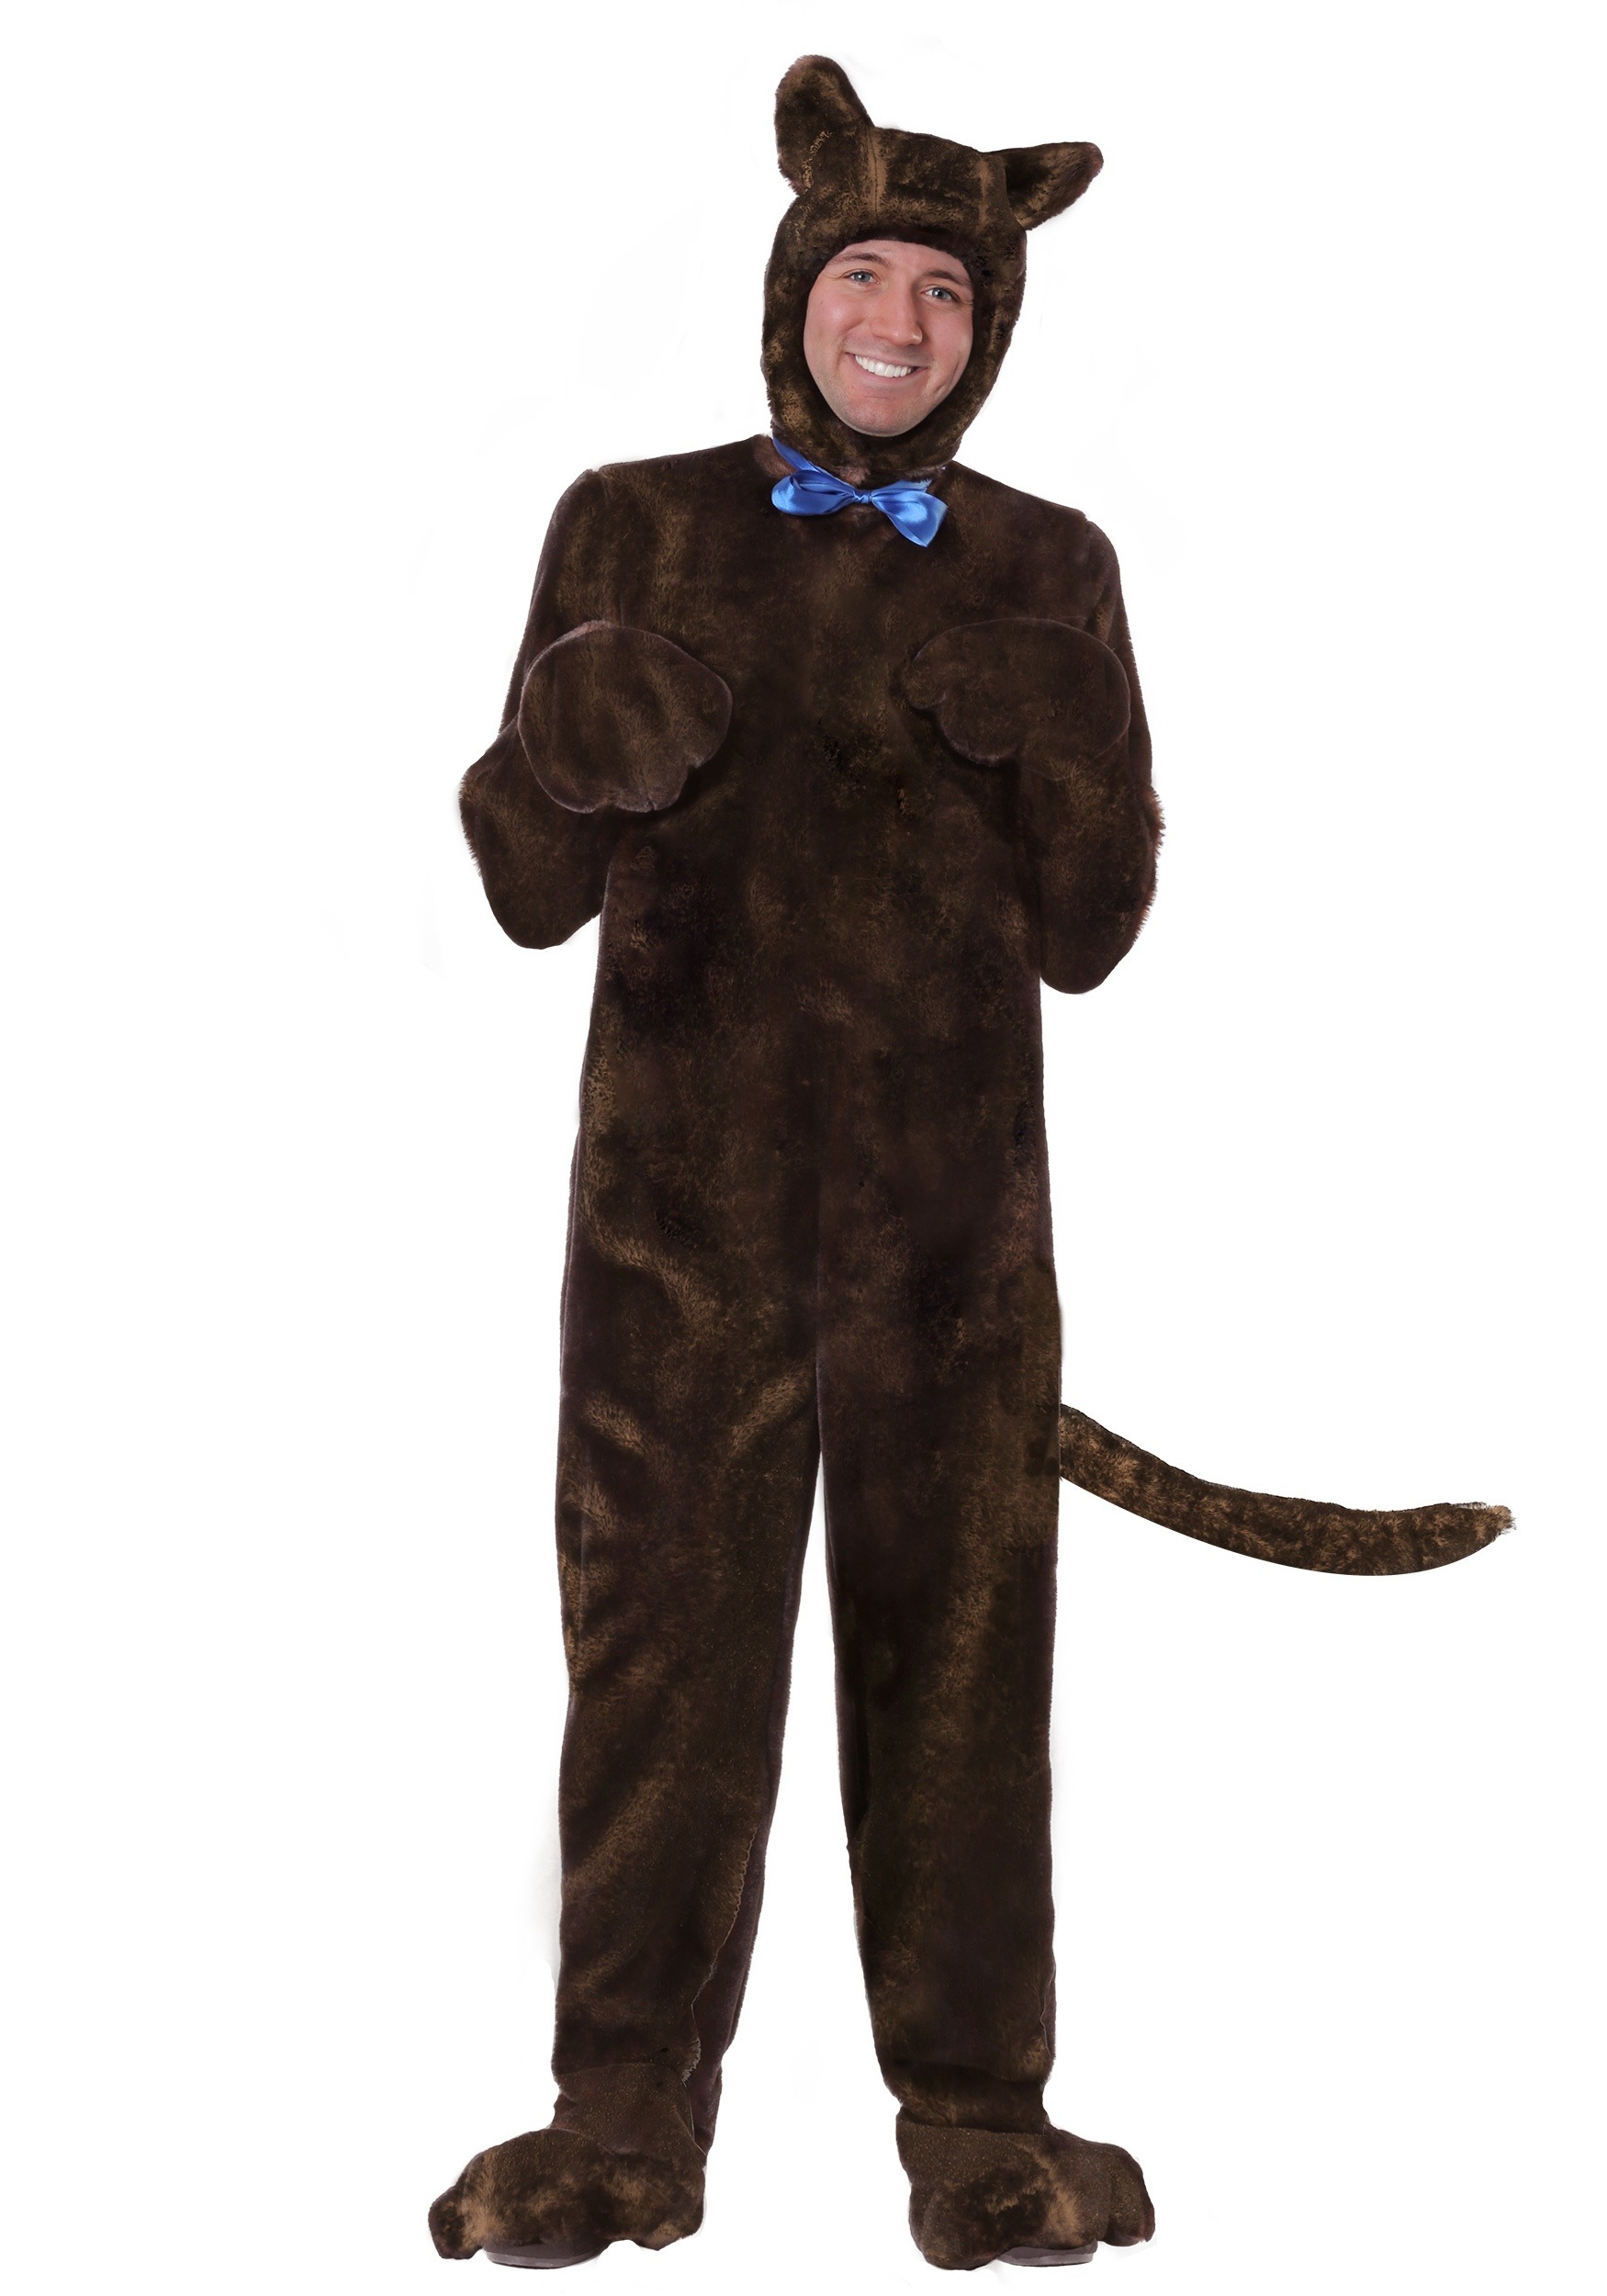 Image of Deluxe Brown Dog Costume Plus Size 2X ID FUN6432PL-2X